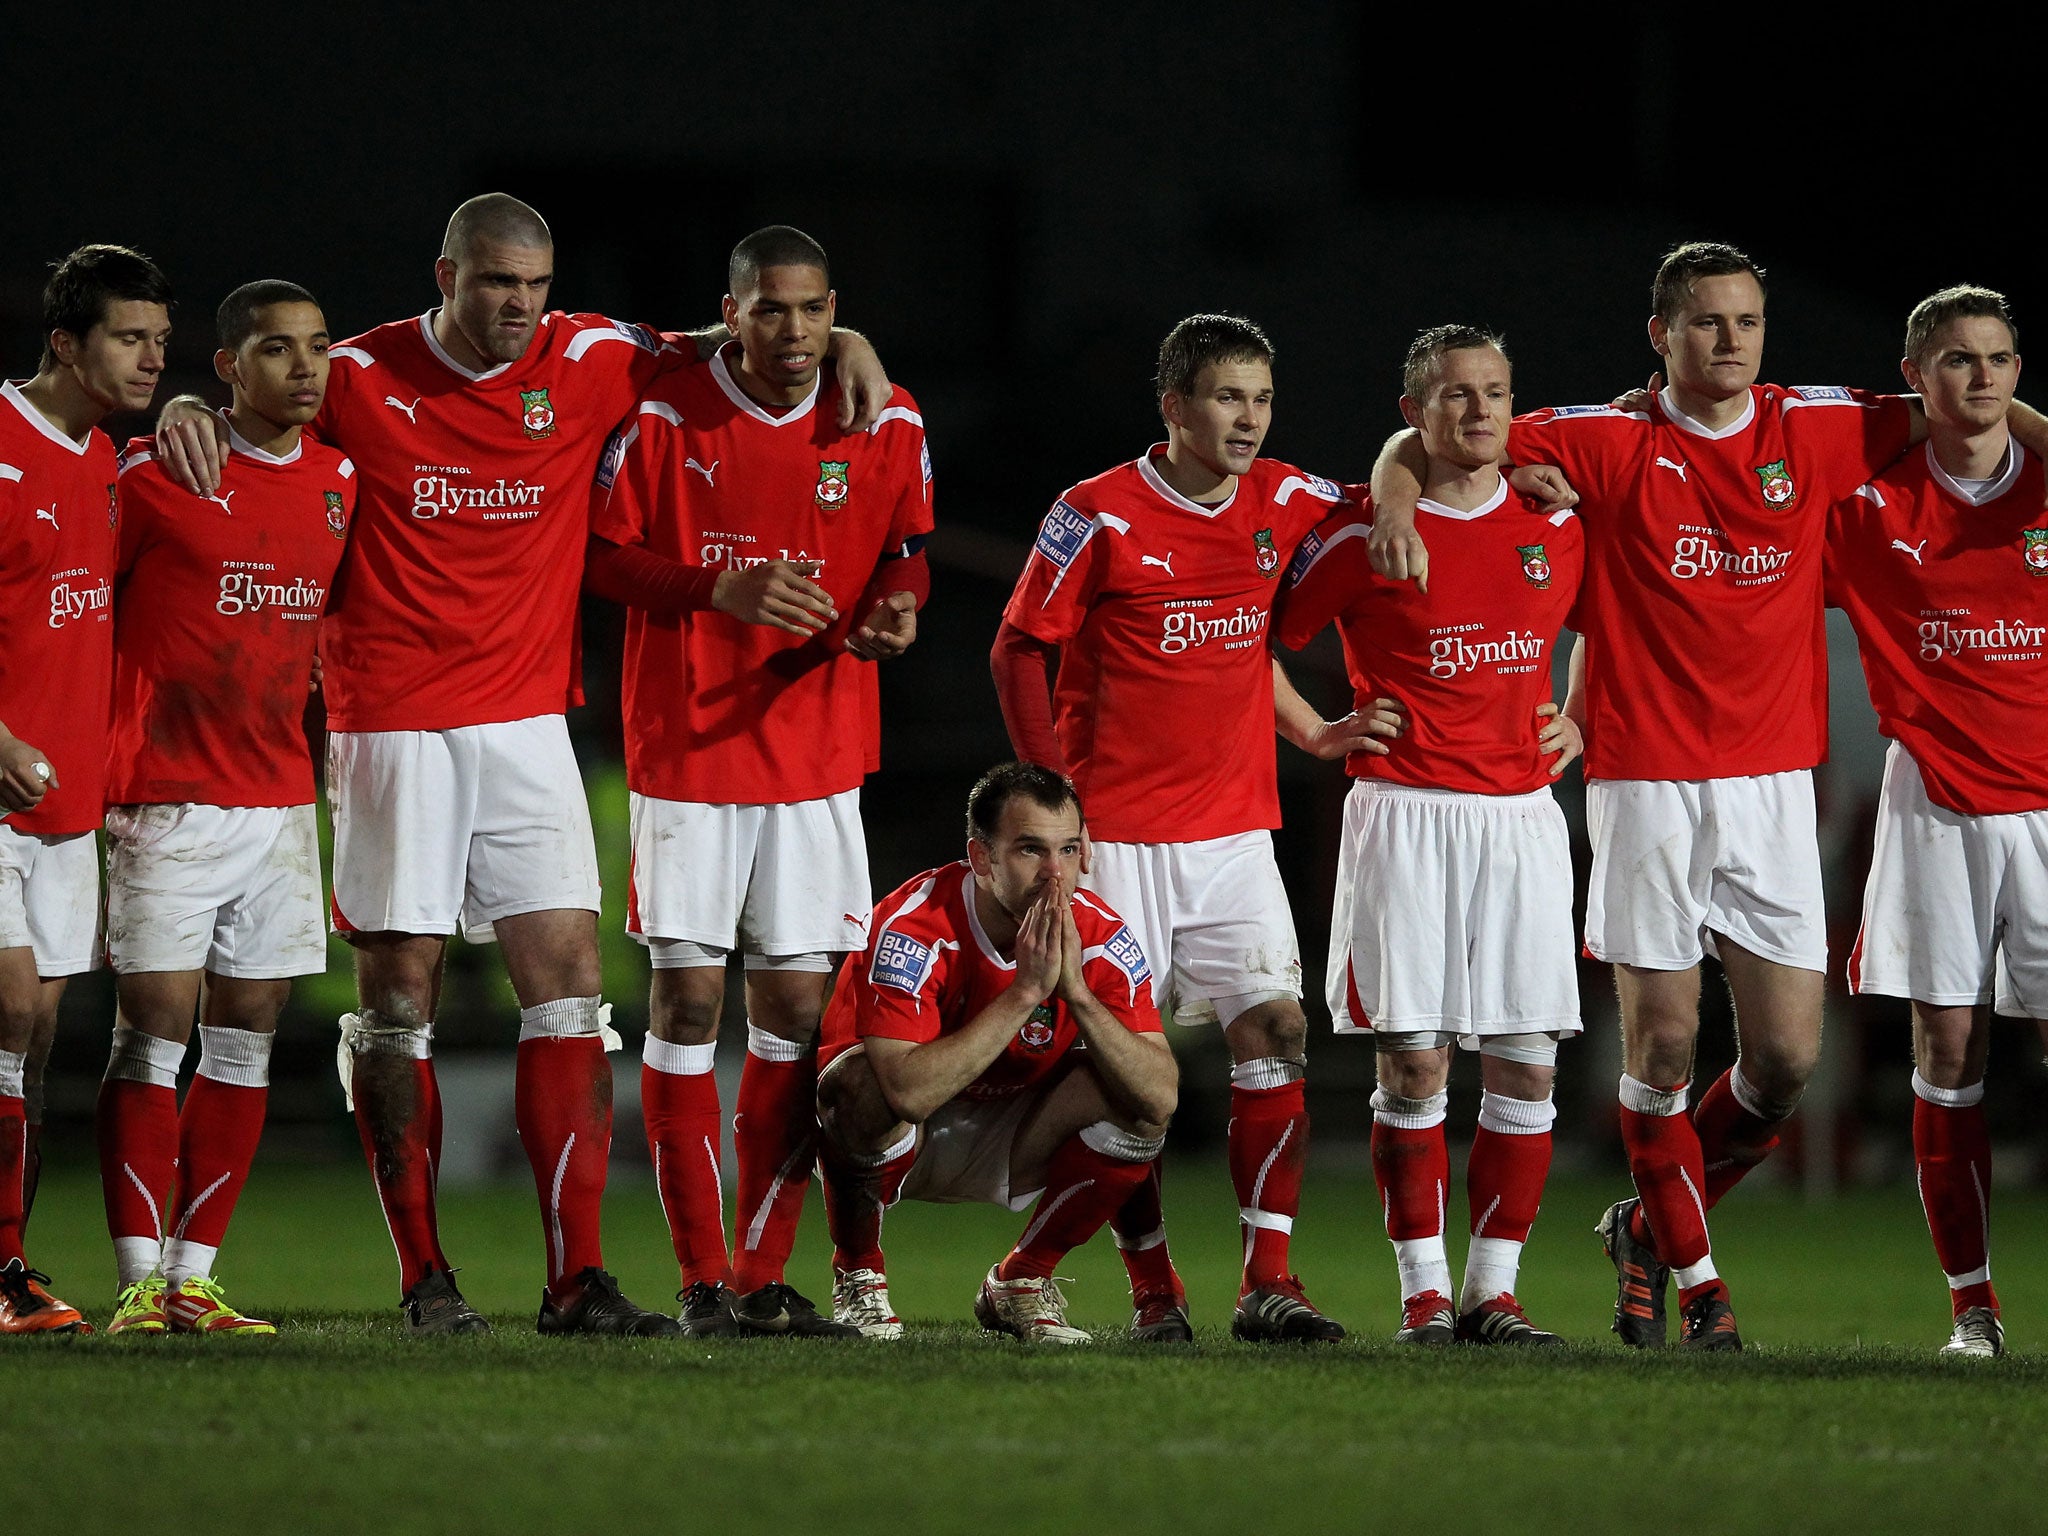 Wrexham's players' new manager will be selected from those who apply via the club's website